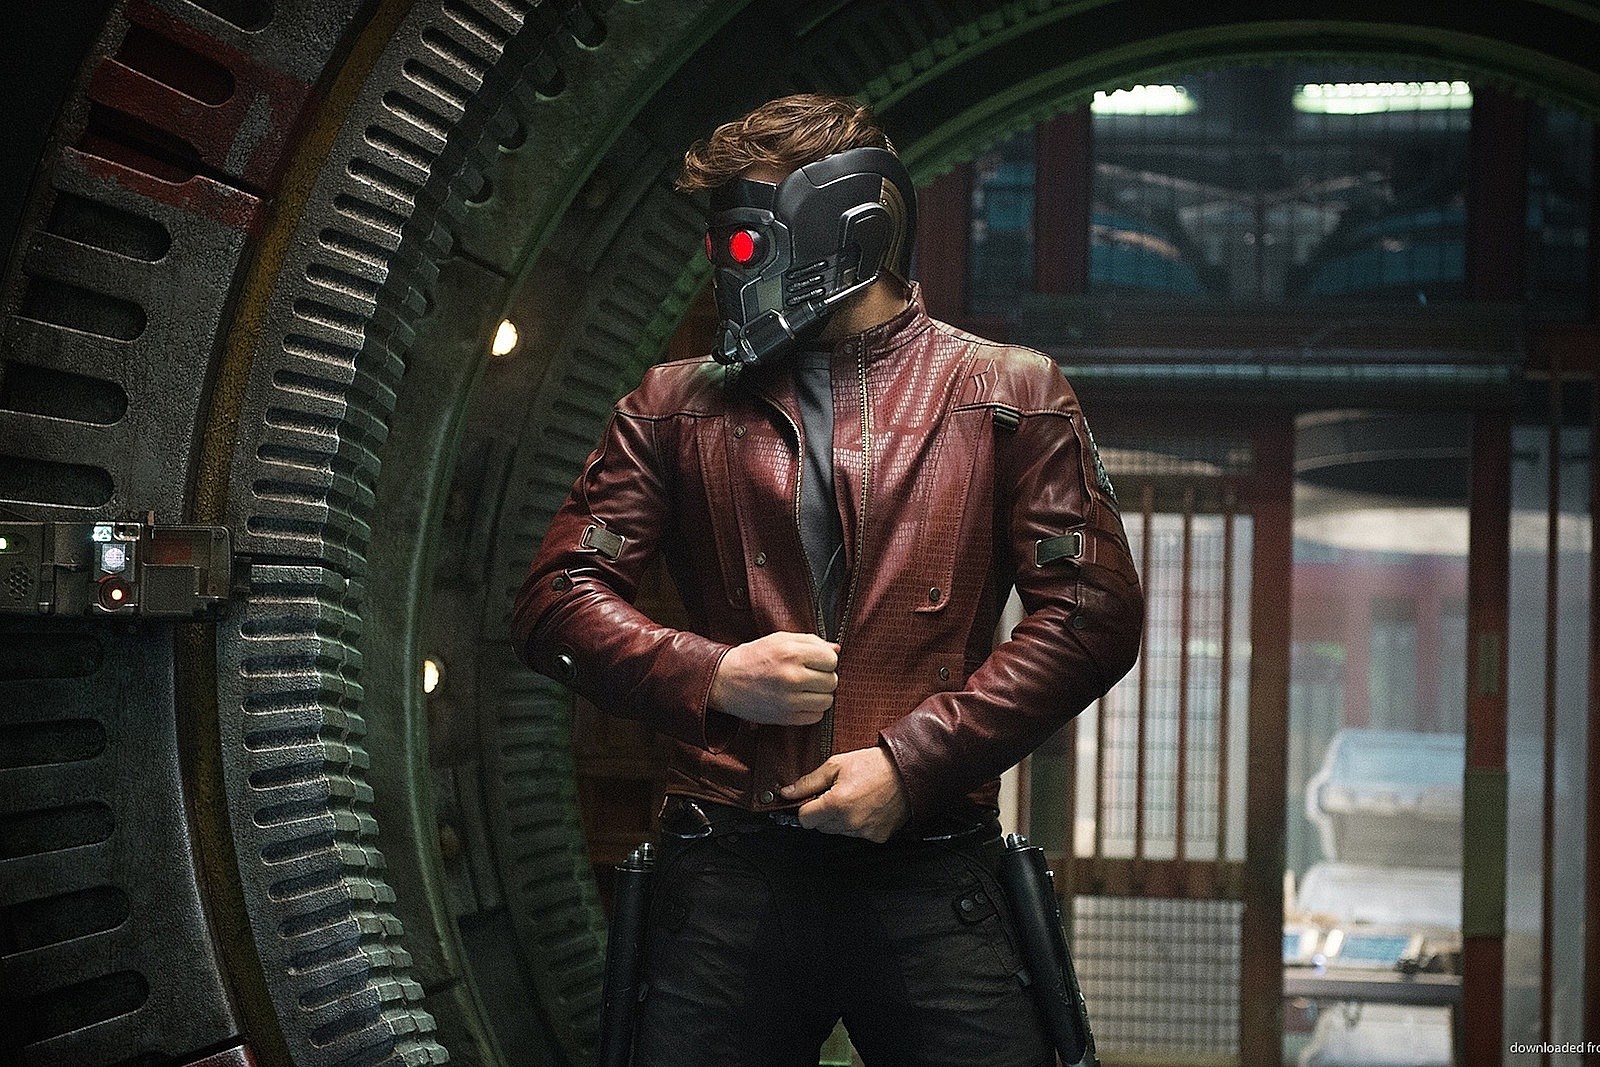 Will There Be a Guardians of the Galaxy 4? Chris Pratt's Star-Lord May  Return